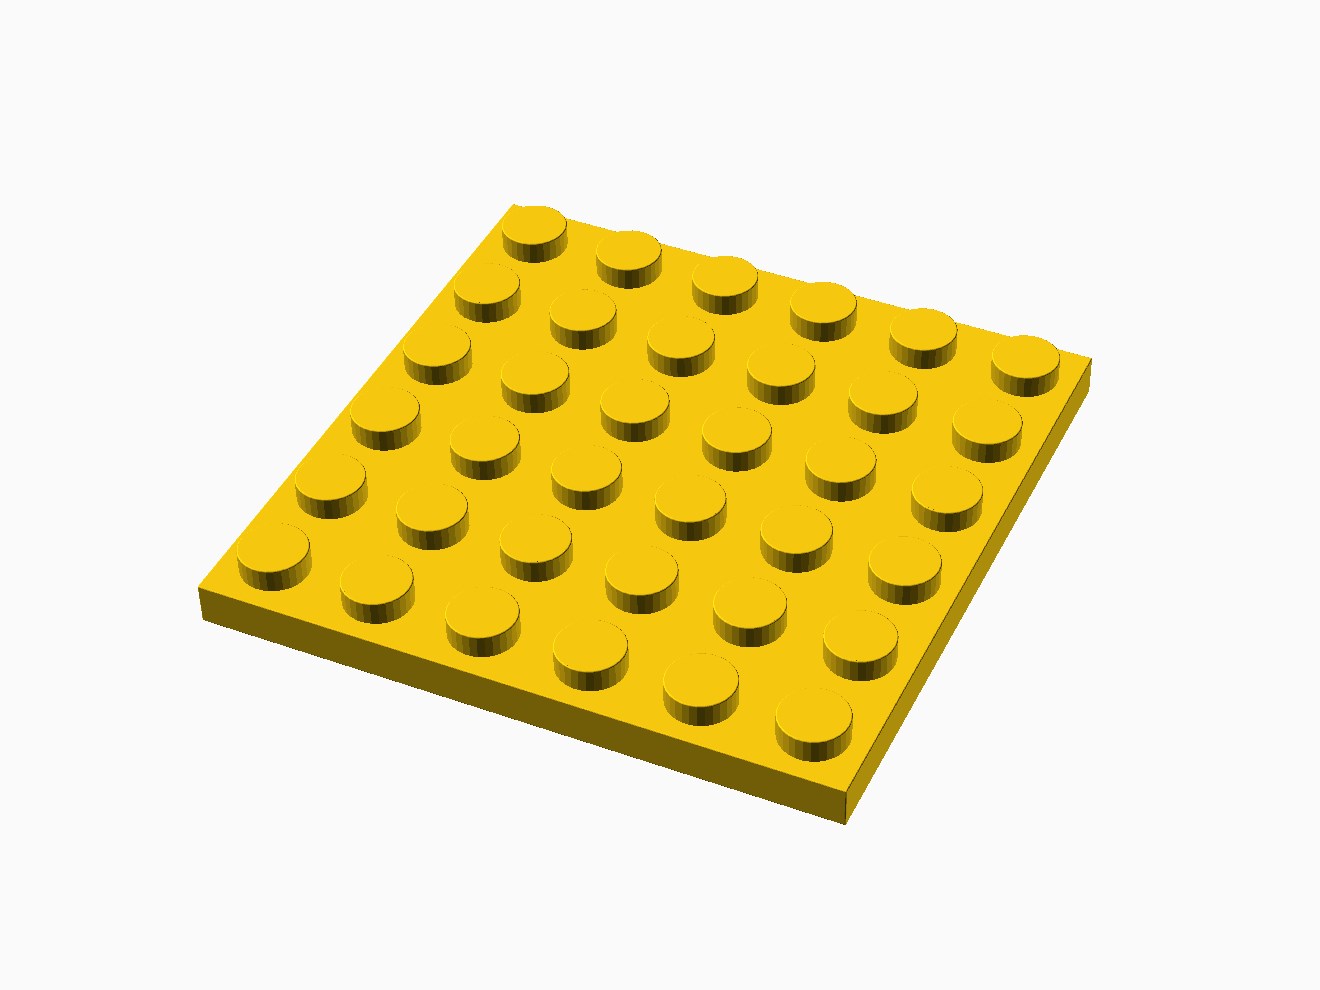 3D printable model of a LEGO 6x6 Plate with standard knobs.